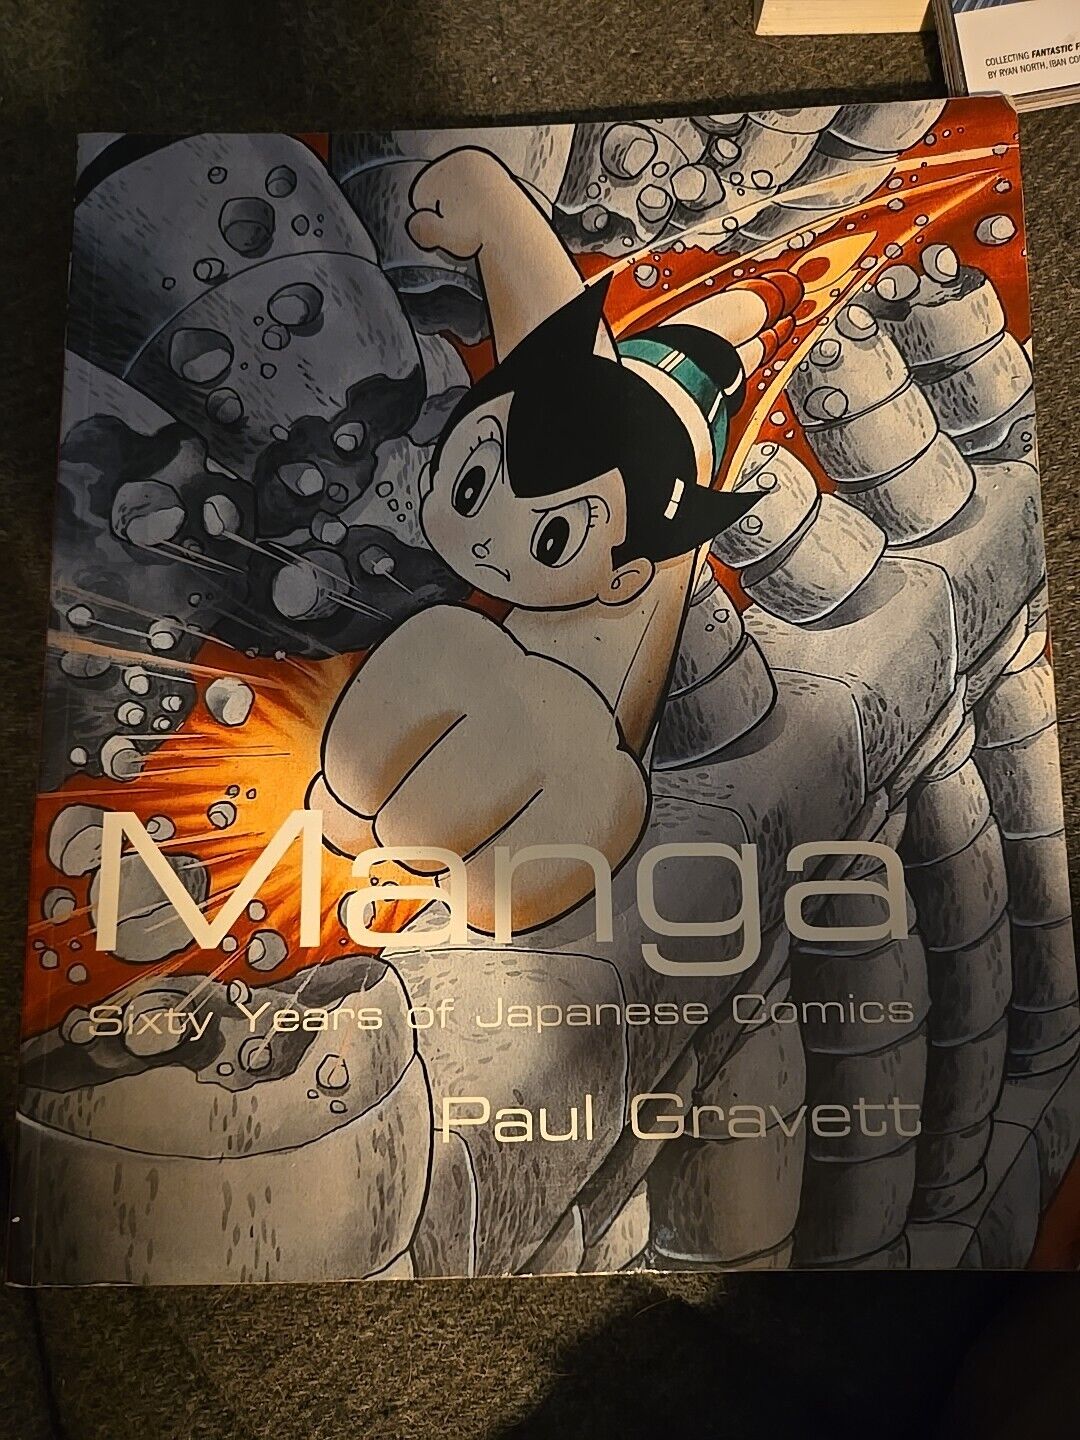 Manga: Sixty Years of Japanese Comics by Paul Gravett Paperback Book The Fast